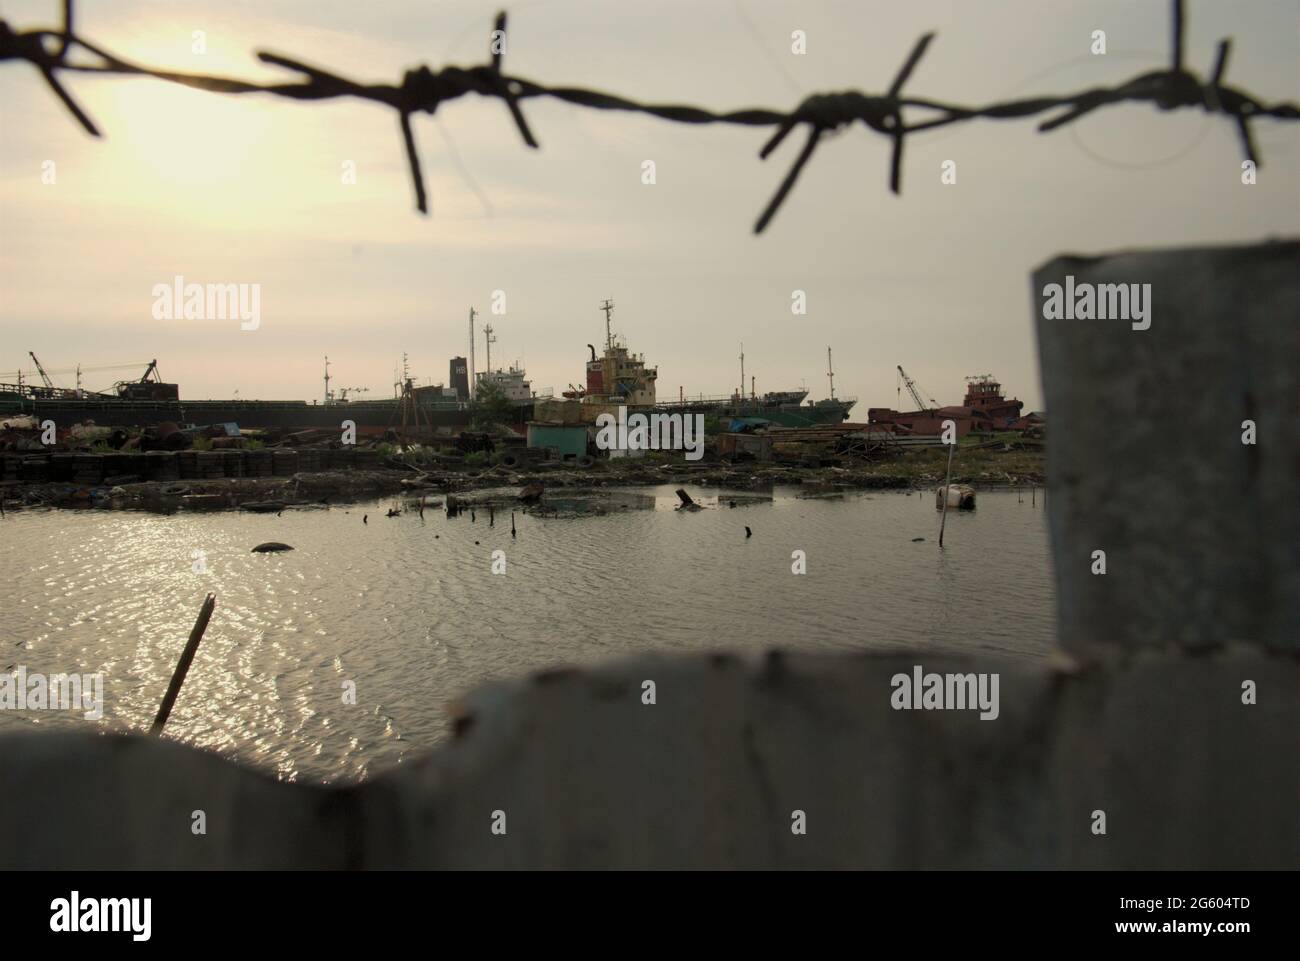 A ship-breaking yard area is seen through a fence close to  the coastal village of Marunda in Cilincing, Jakarta, Indonesia. Stock Photo